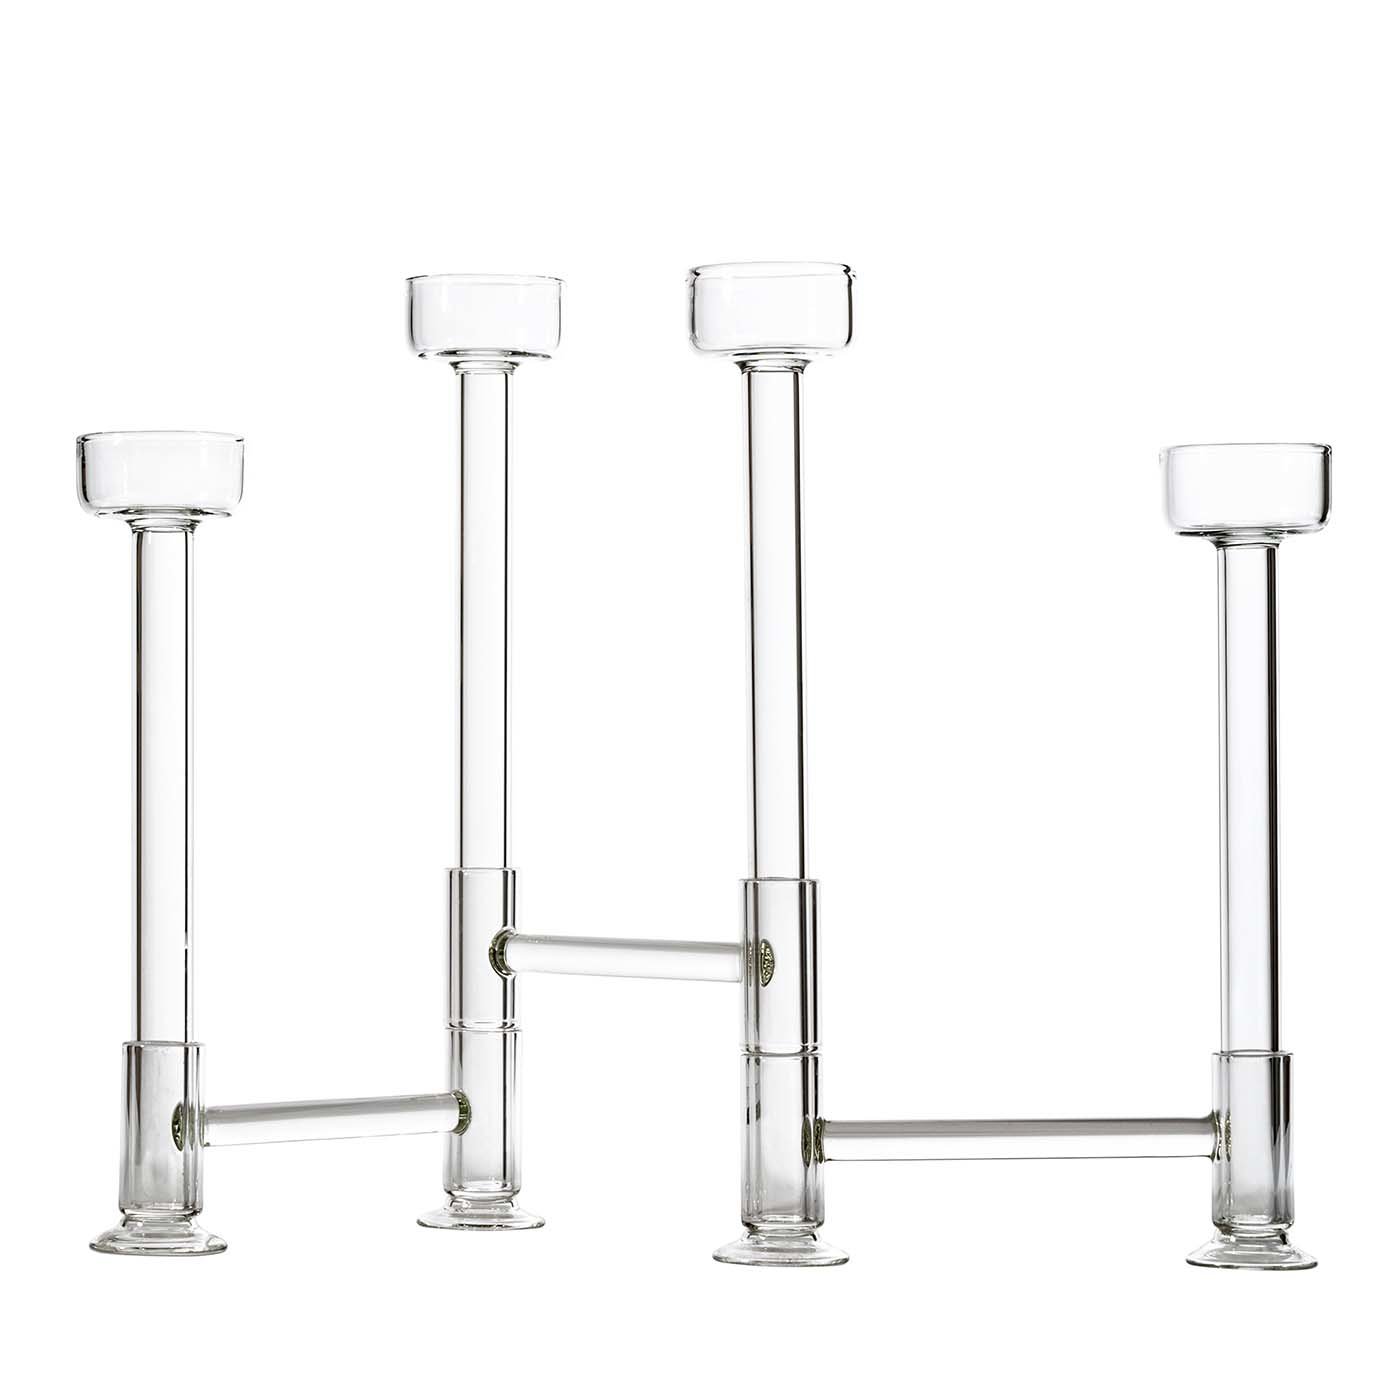 Eolo 4 Candle Holder - Main view